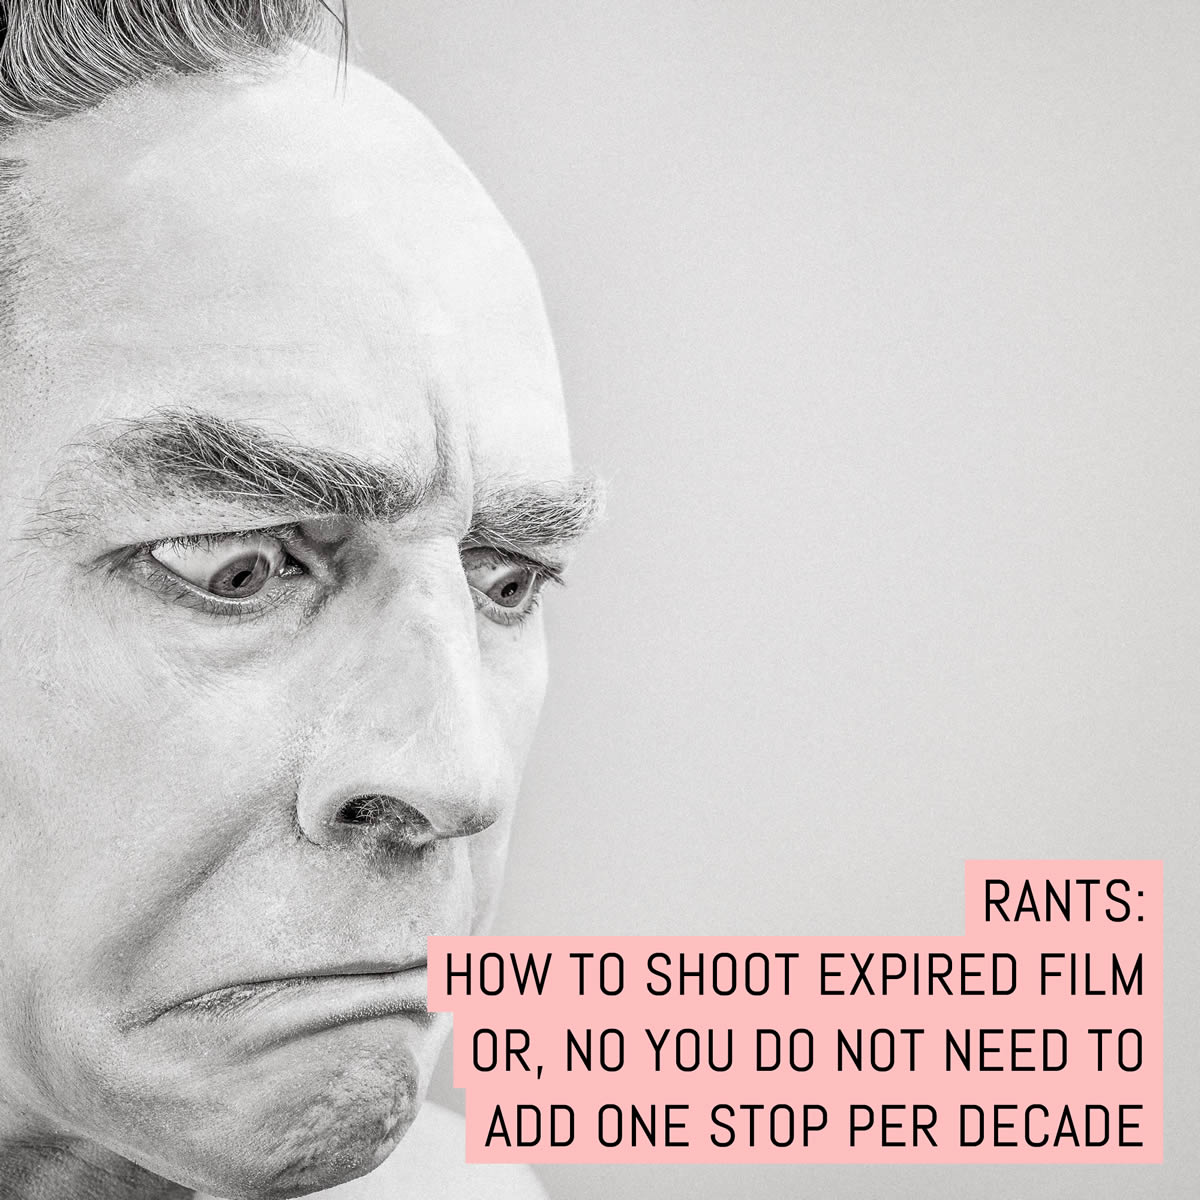 Rants: How to shoot expired film or, no you do not need to add one stop per decade